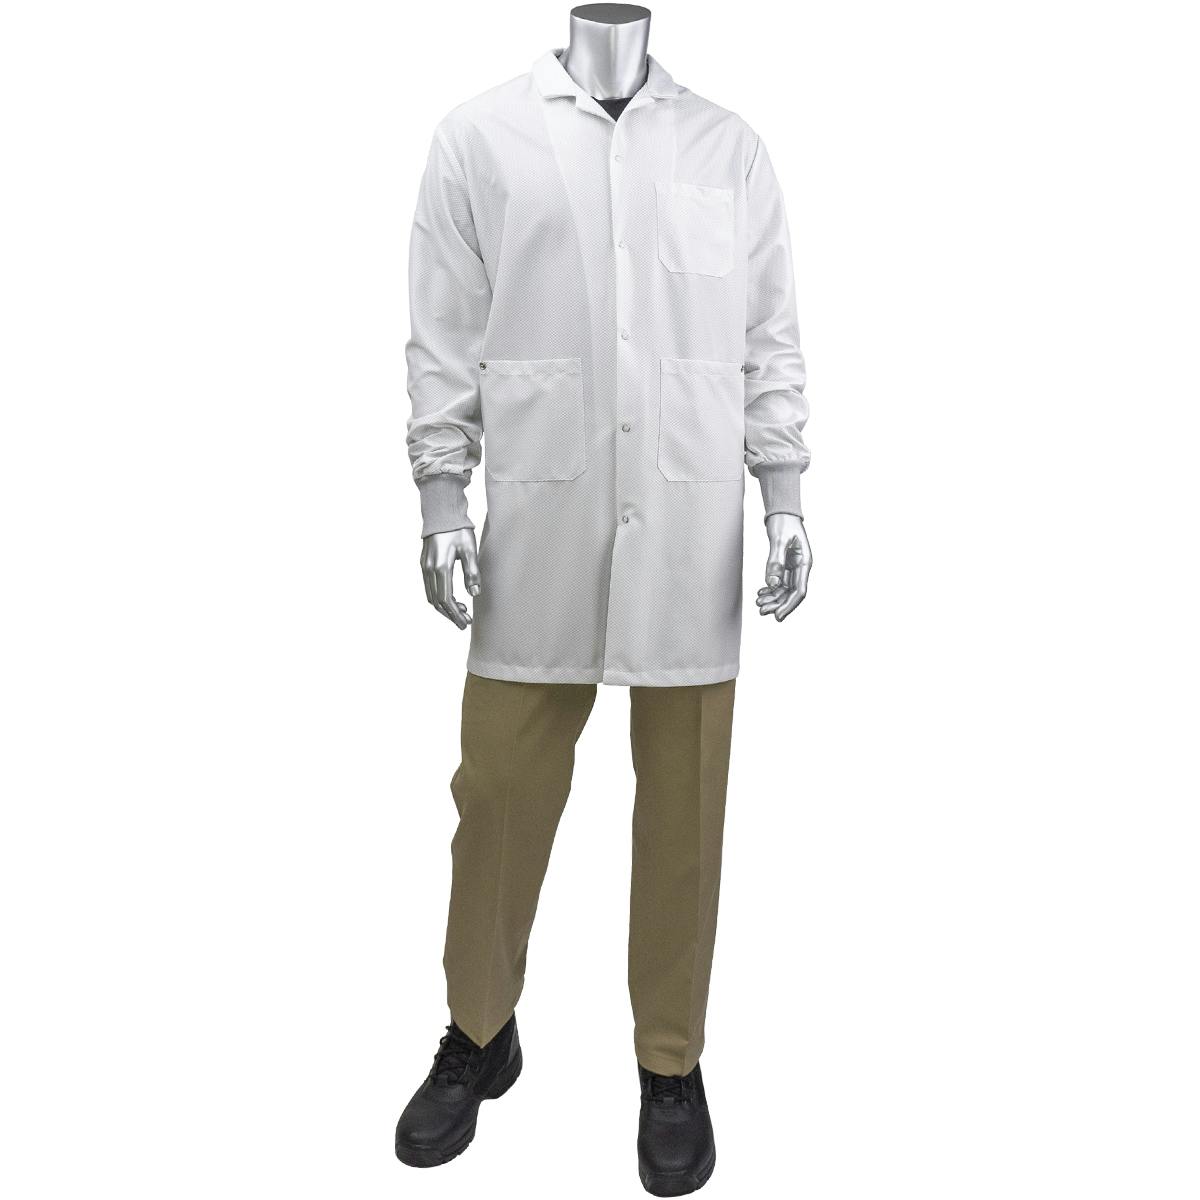 StatMaster Long ESD Labcoat - ESD Knit Cuff, White (BR51C-47WH)